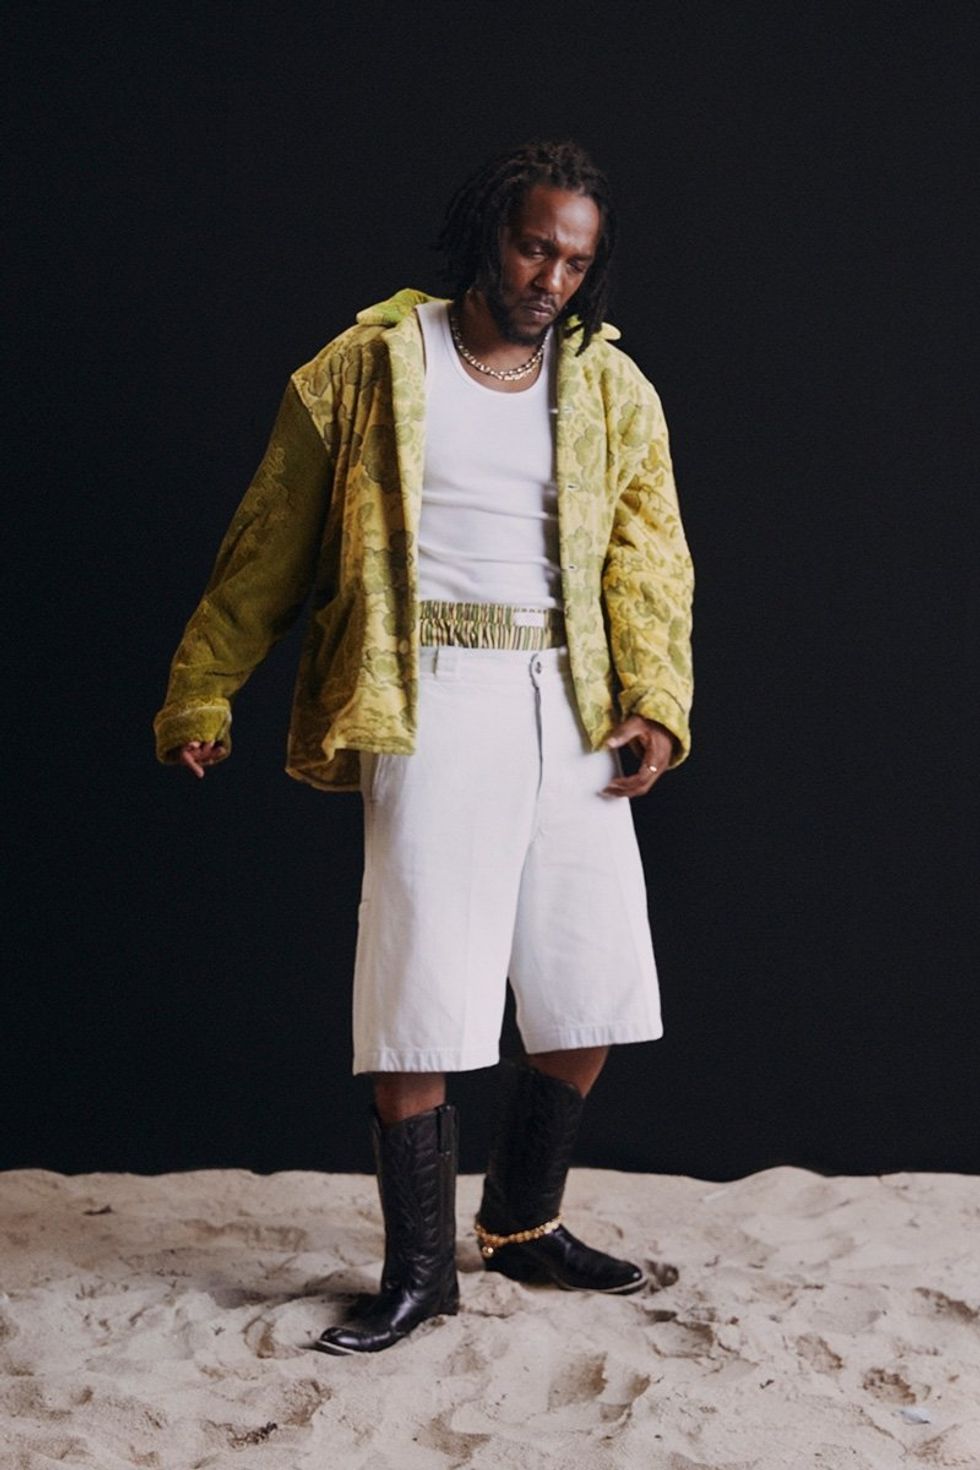 An image taken by the photographer of the rapper Kendrick Lamar in which he\u2019s wearing cowboy boots and standing on sand.